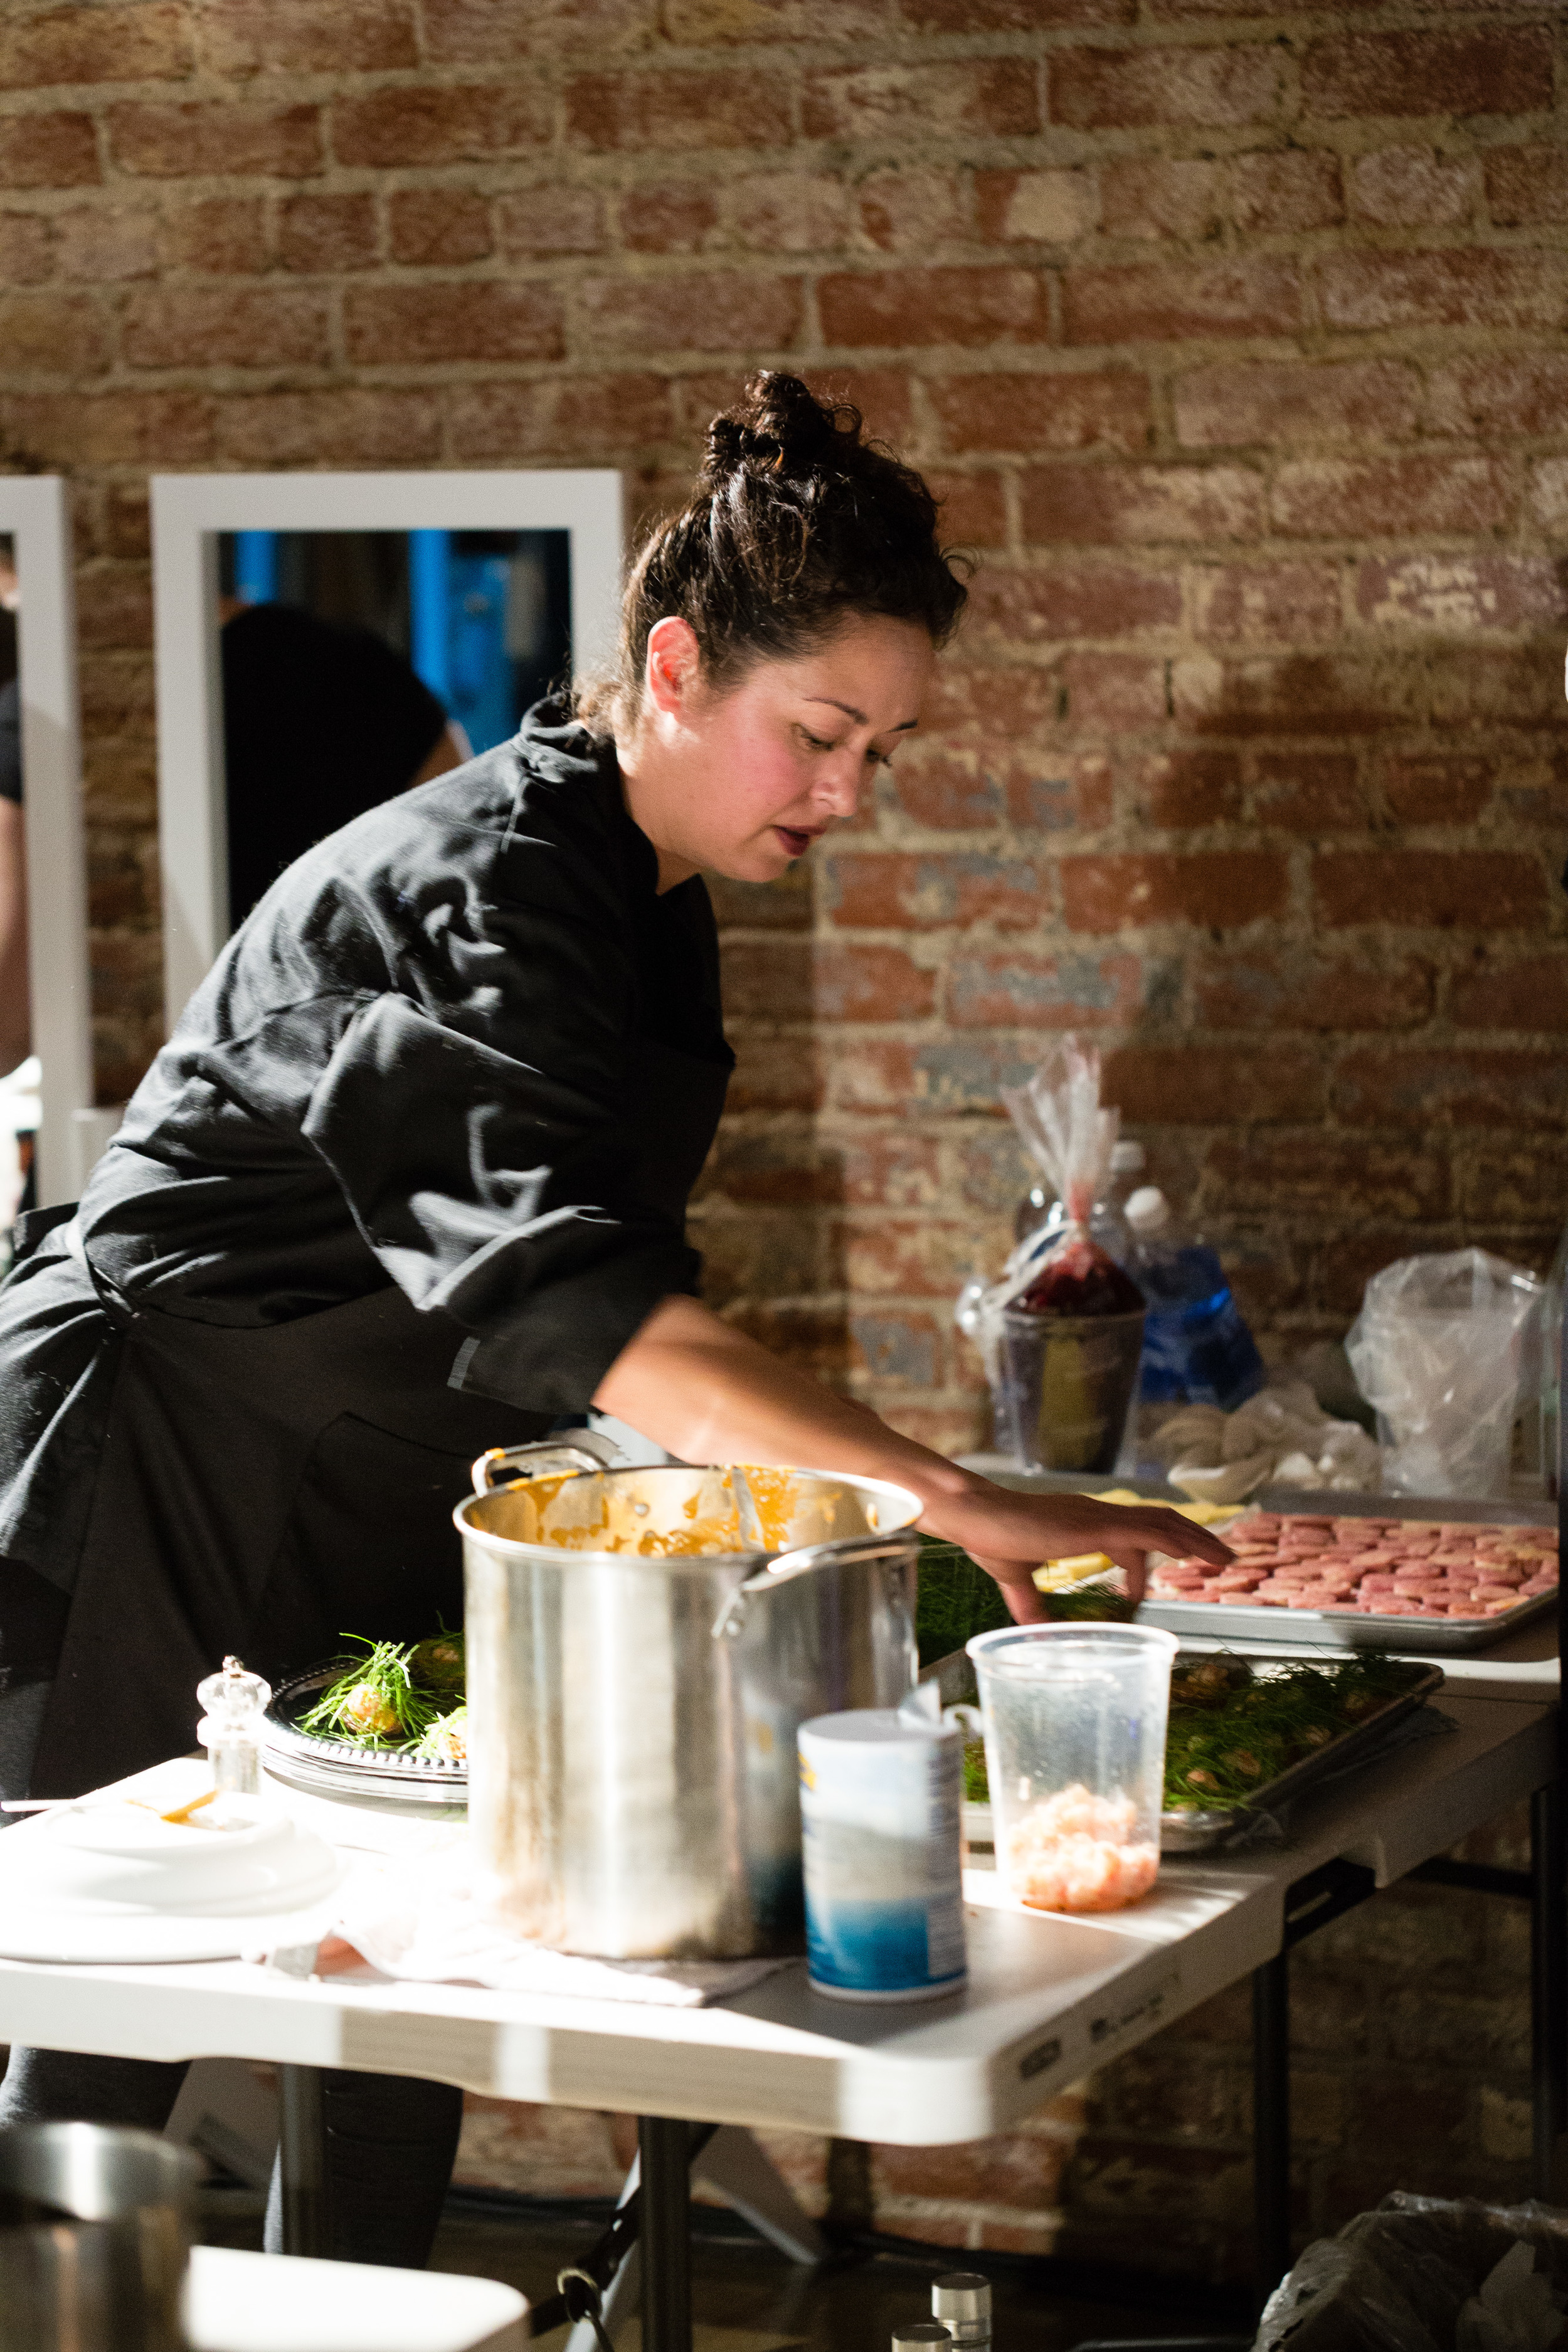   The Fleiss Feast  2016 Interactive dinner collaboration (chef preparation) In collaboration with Los Angeles Eats Itself, Chef Teresa Montańo and Chef Mia Wasilevich March 6th, 2016, LA River Studio, Los Angeles, CA photo courtesy of Michael Underw